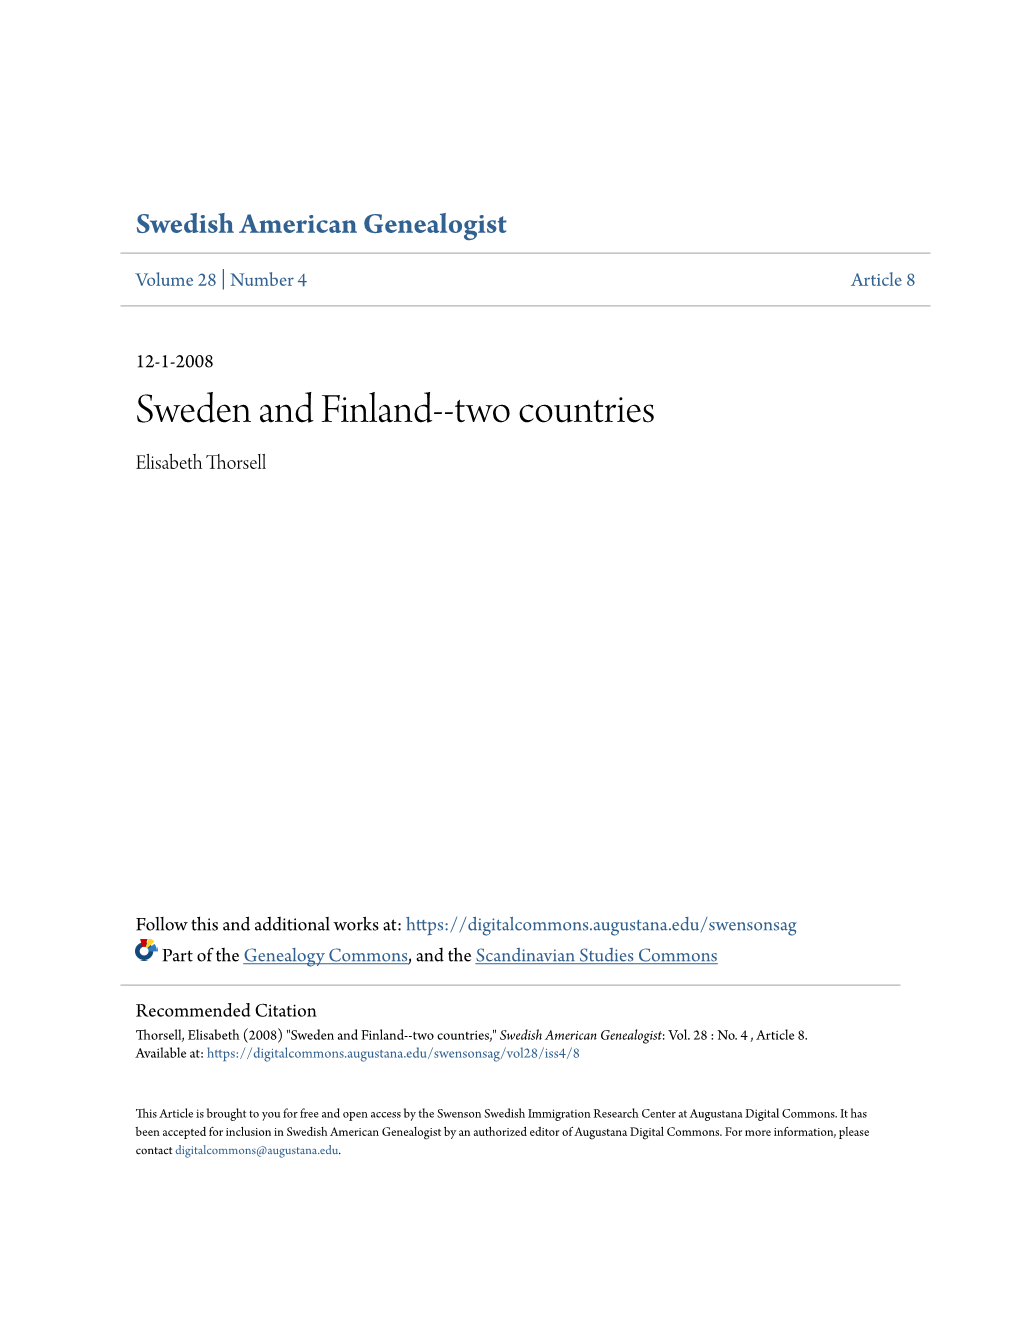 Sweden and Finland--Two Countries Elisabeth Thorsell